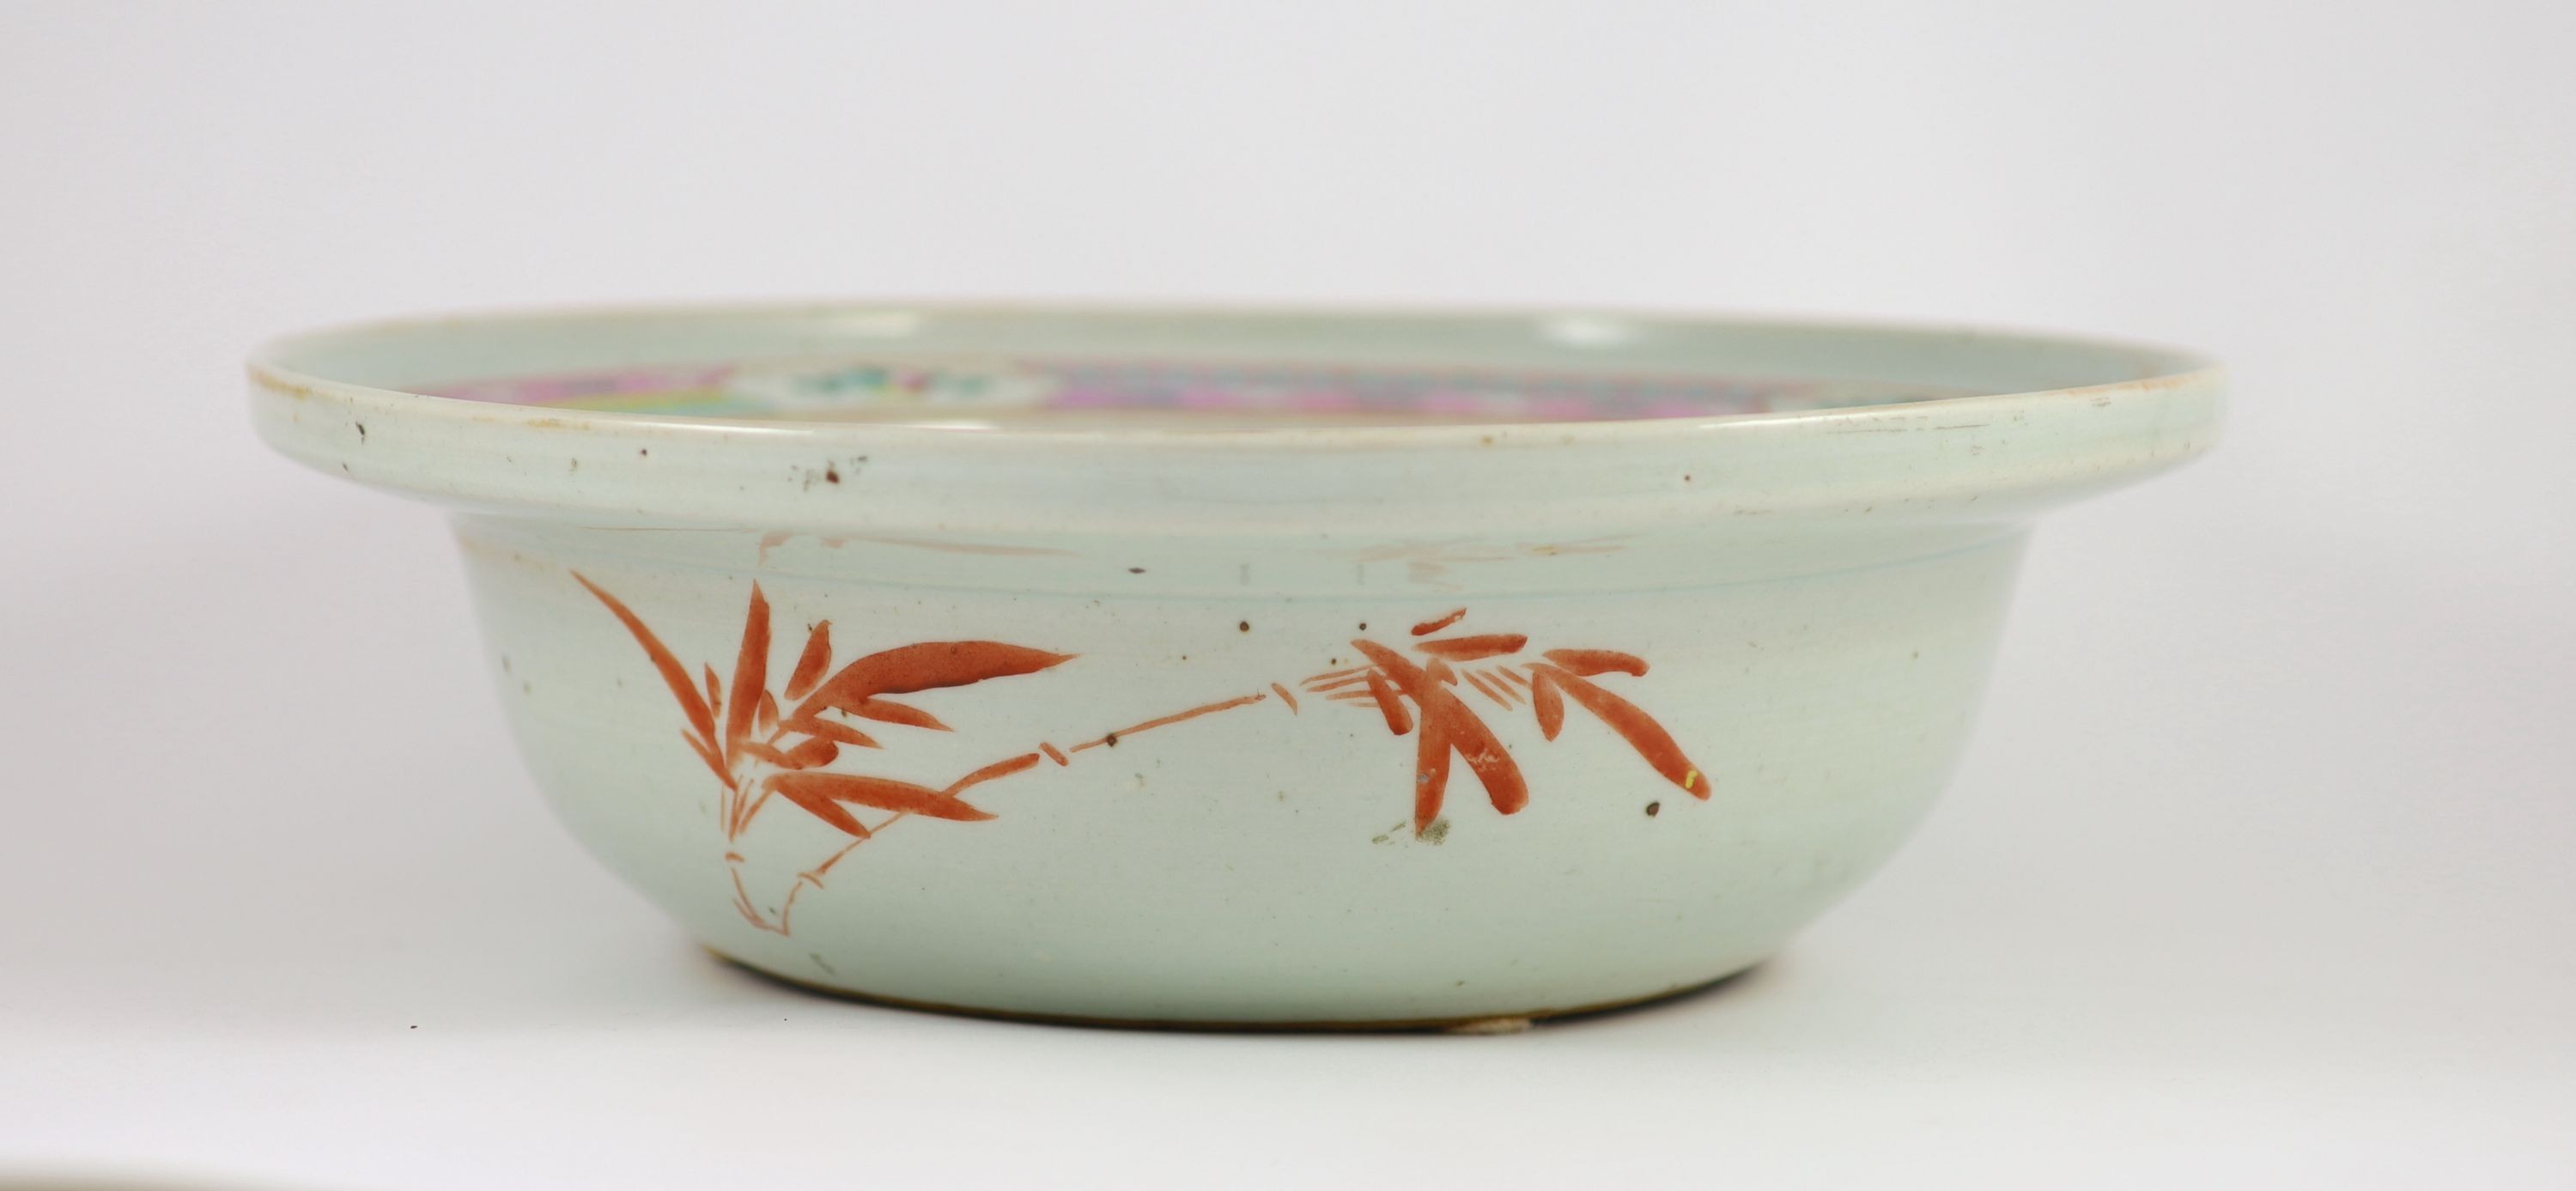 A Chinese famille rose wash basin, mid 19th century, 37.5 cm diameter, over-glazed firing crack